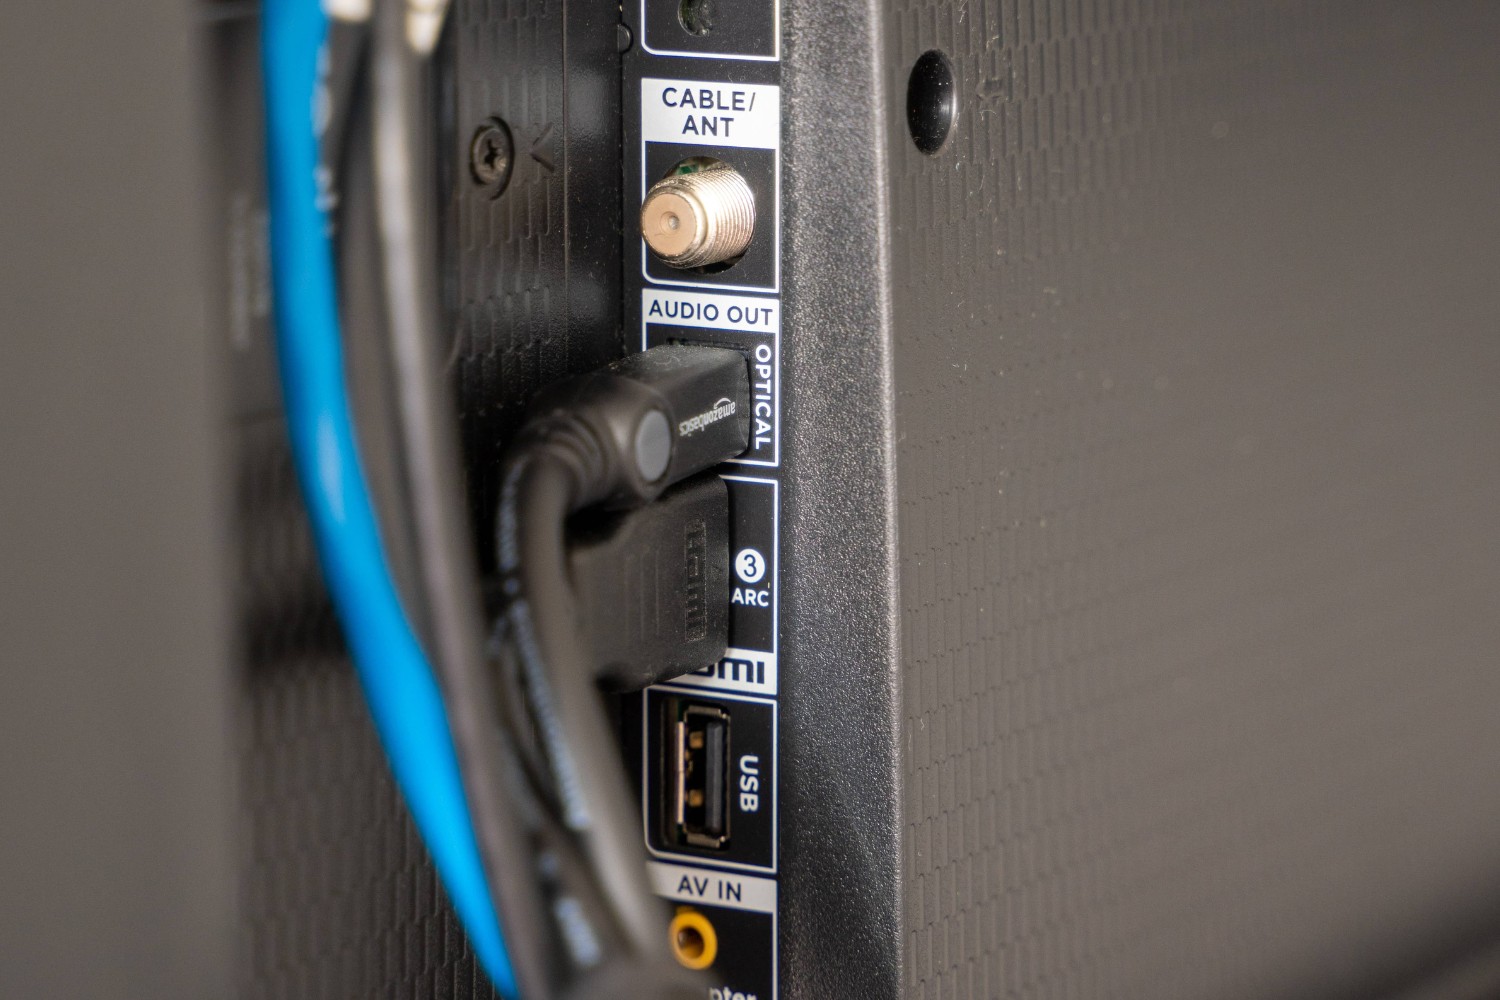 How To Connect Samsung TV To An AV Receiver Using Optical Cable